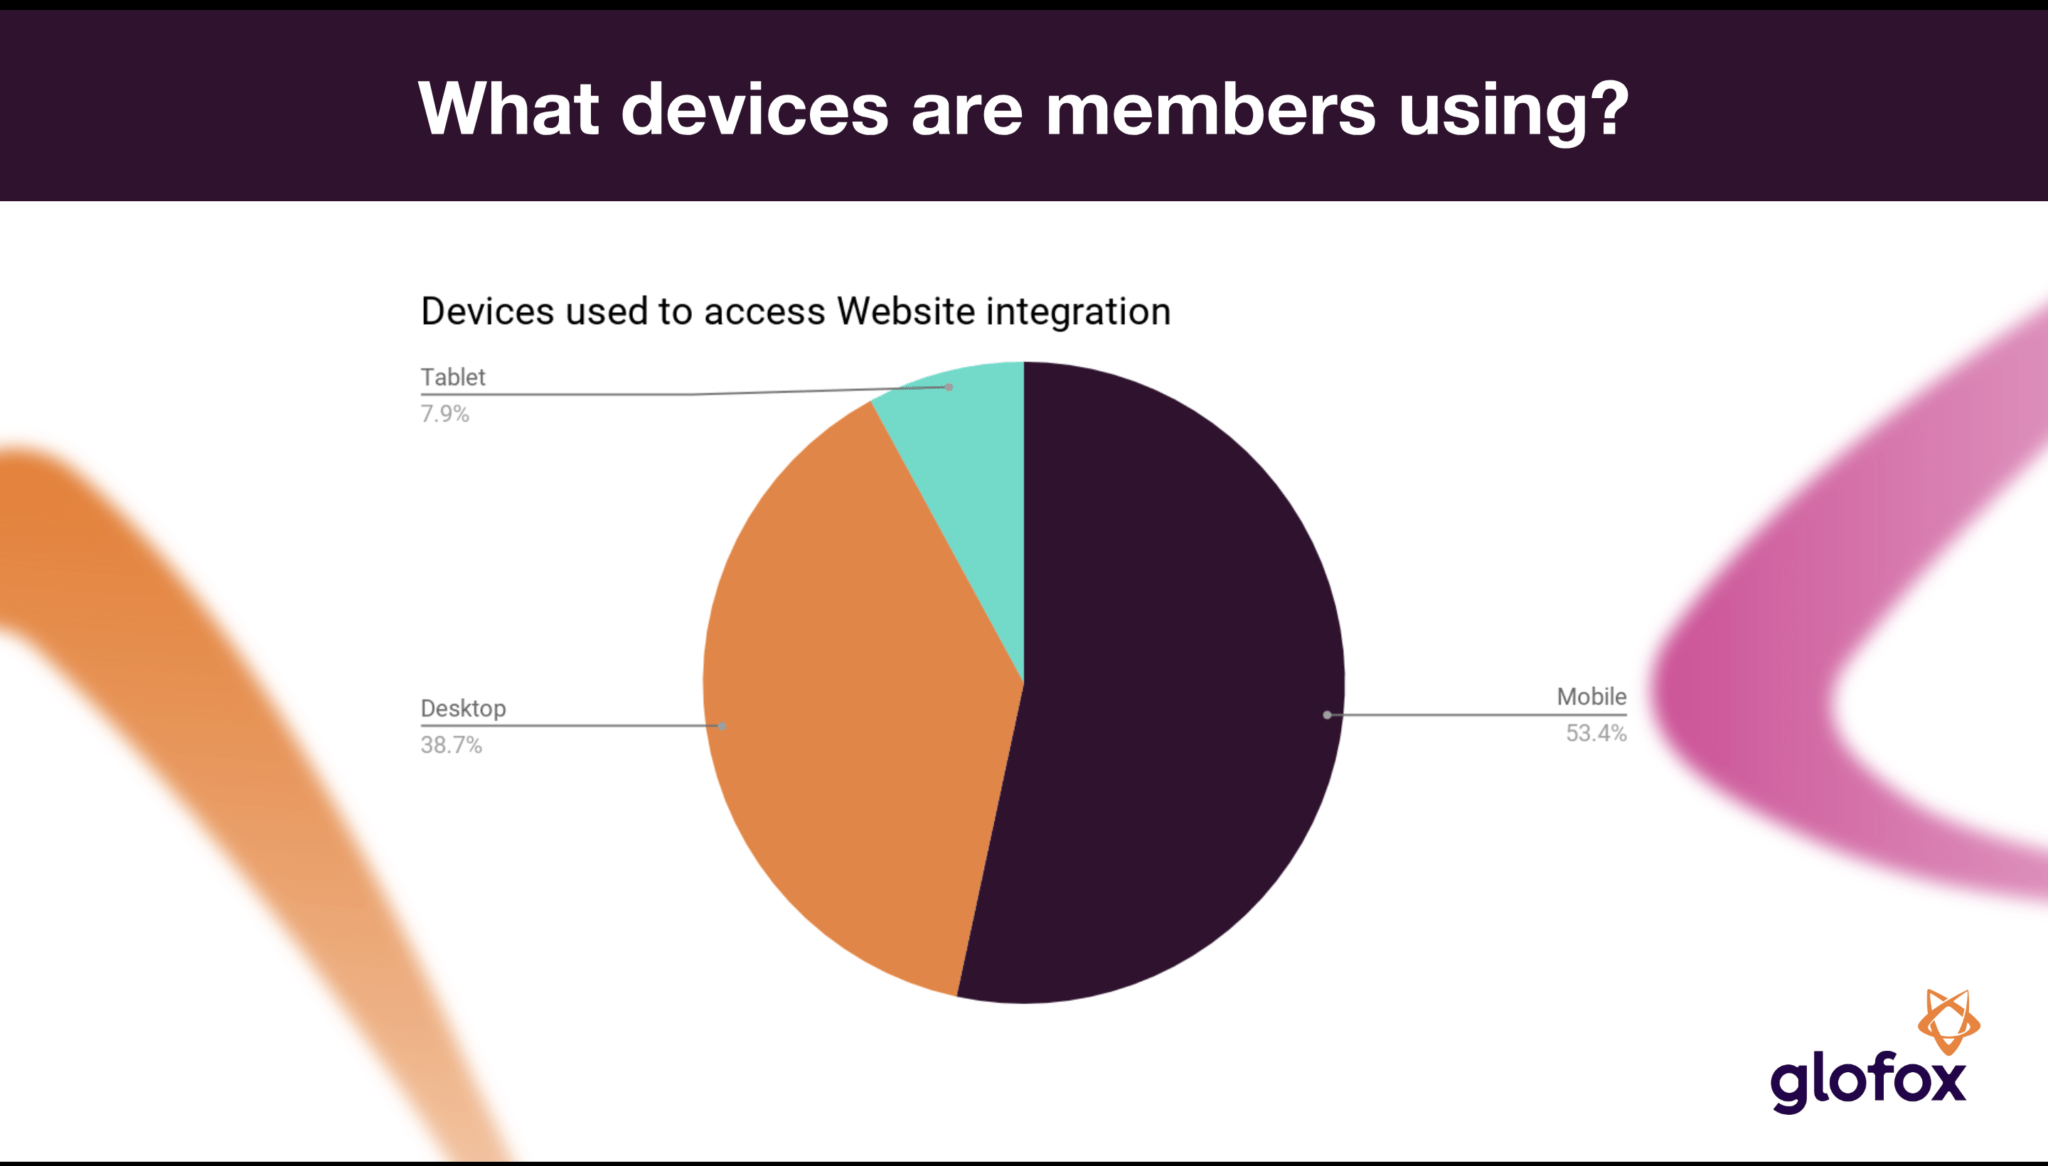 Devices used to access website integration